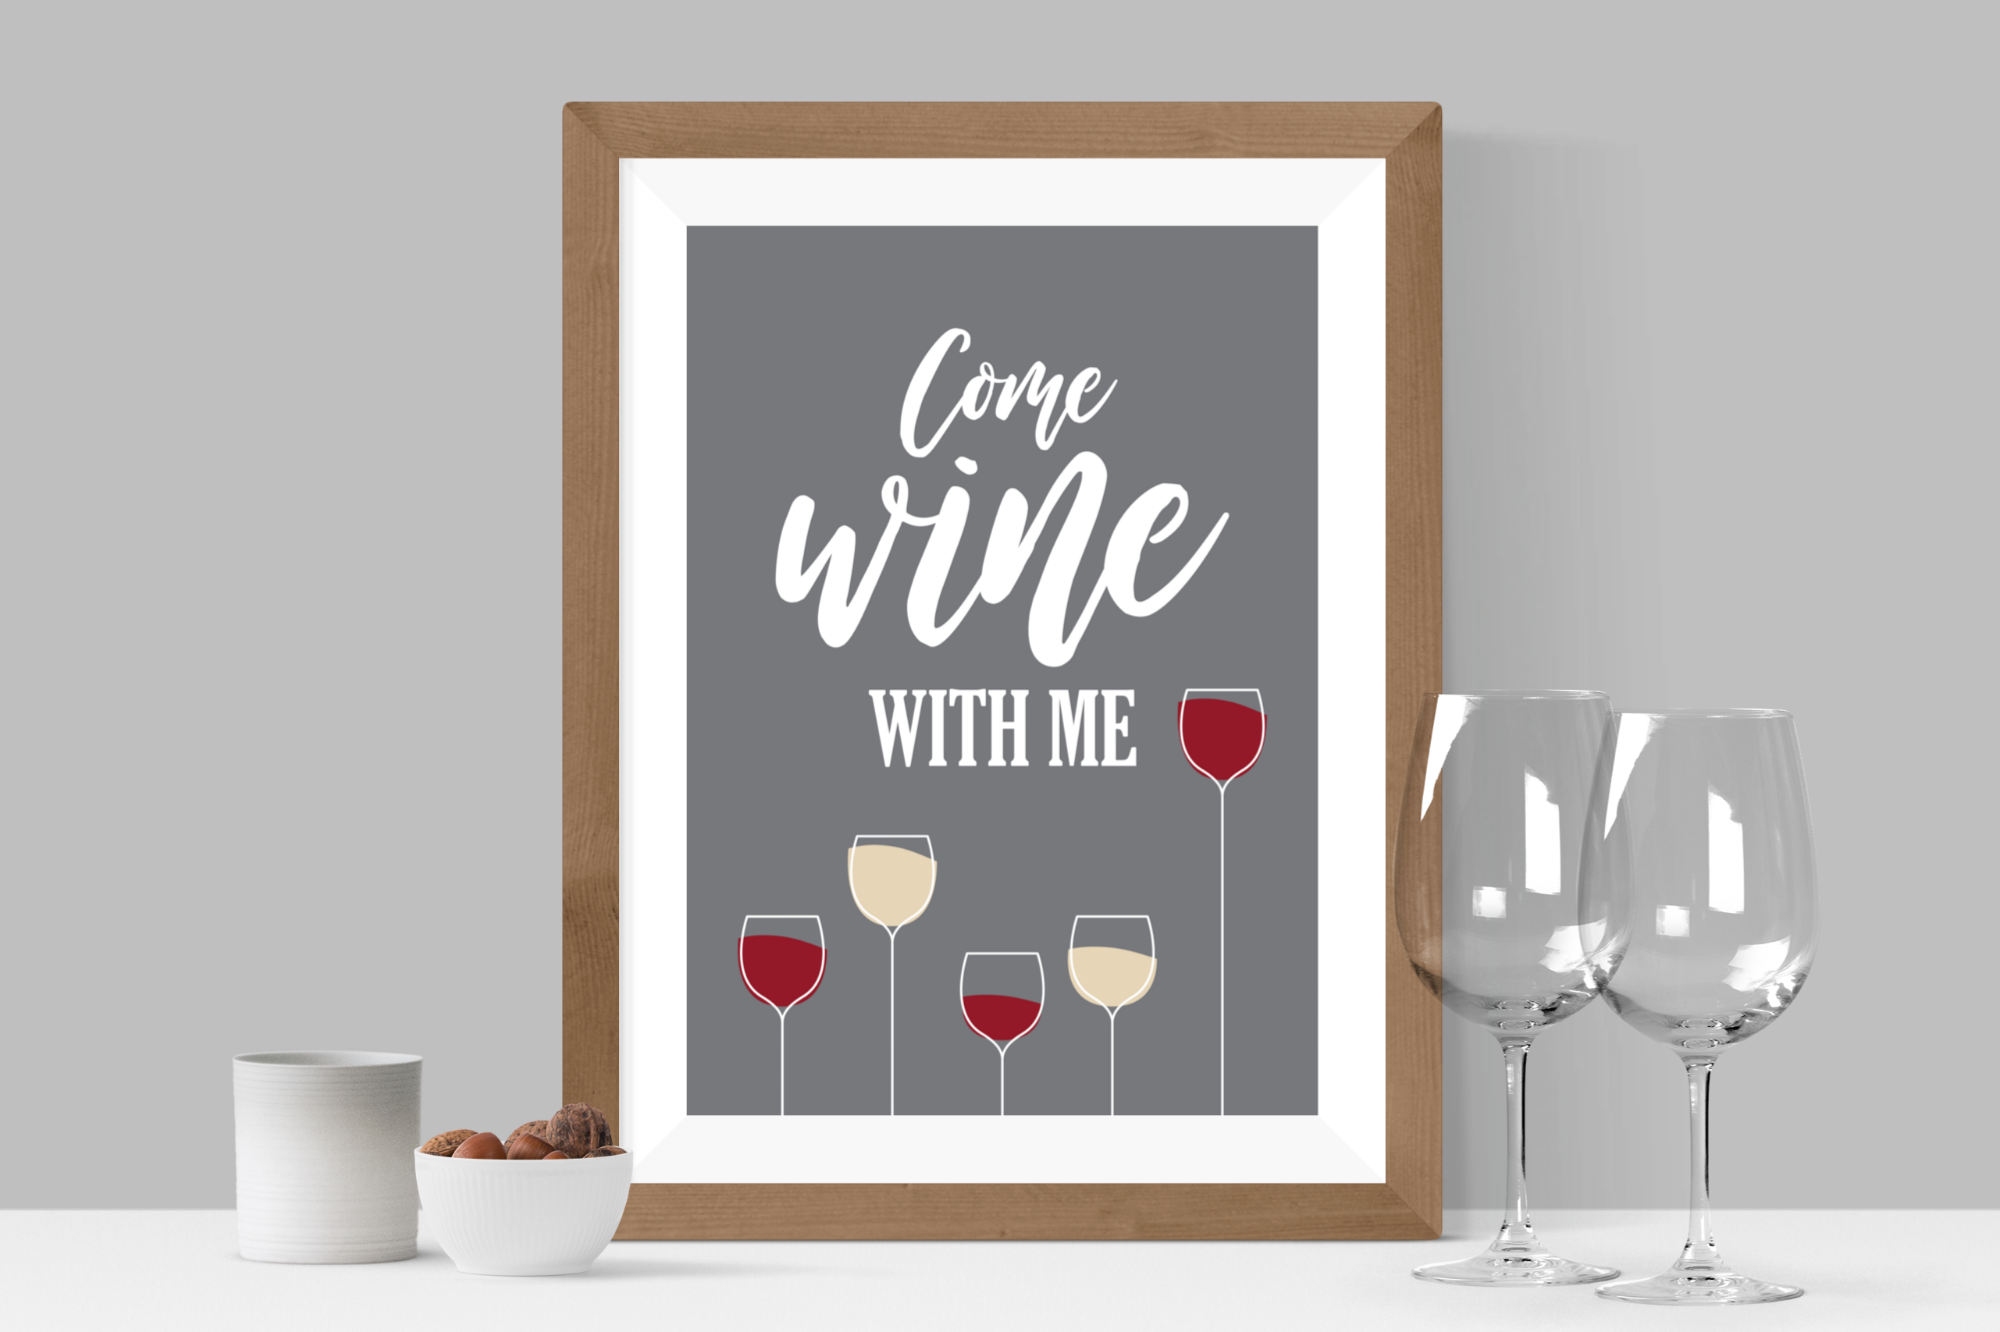 Come-Wine-With-Me-Dark-Wood-Frame-3-x-2